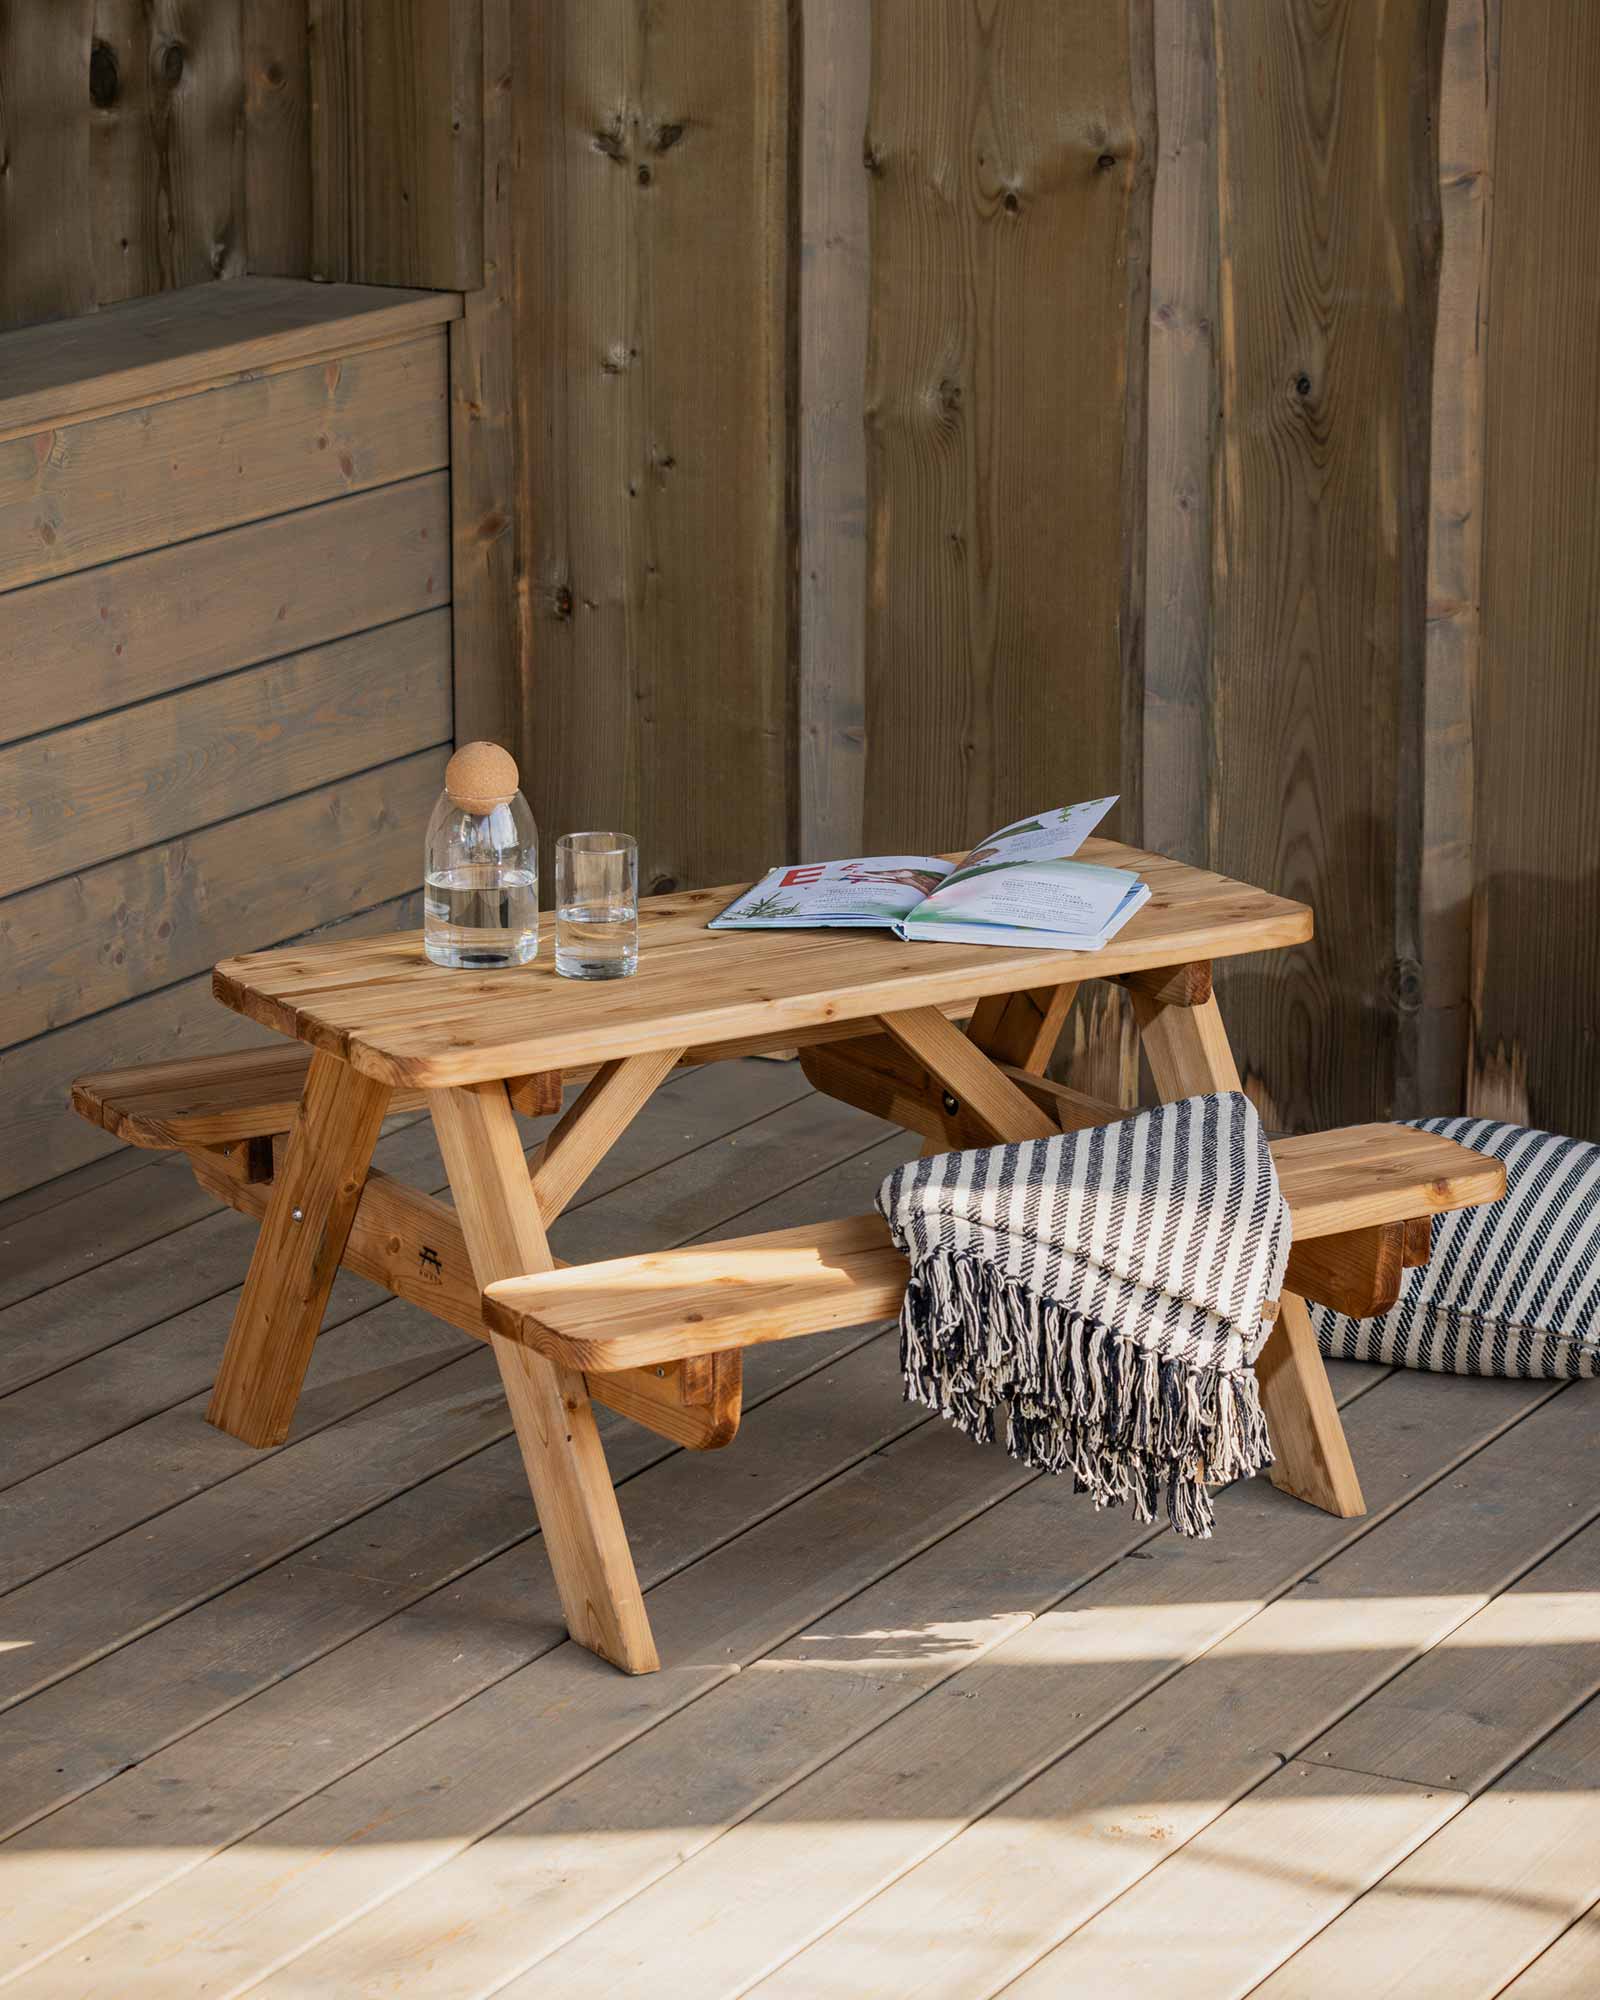 Mini brown wood picnic table on a patio with a water glass and a throw